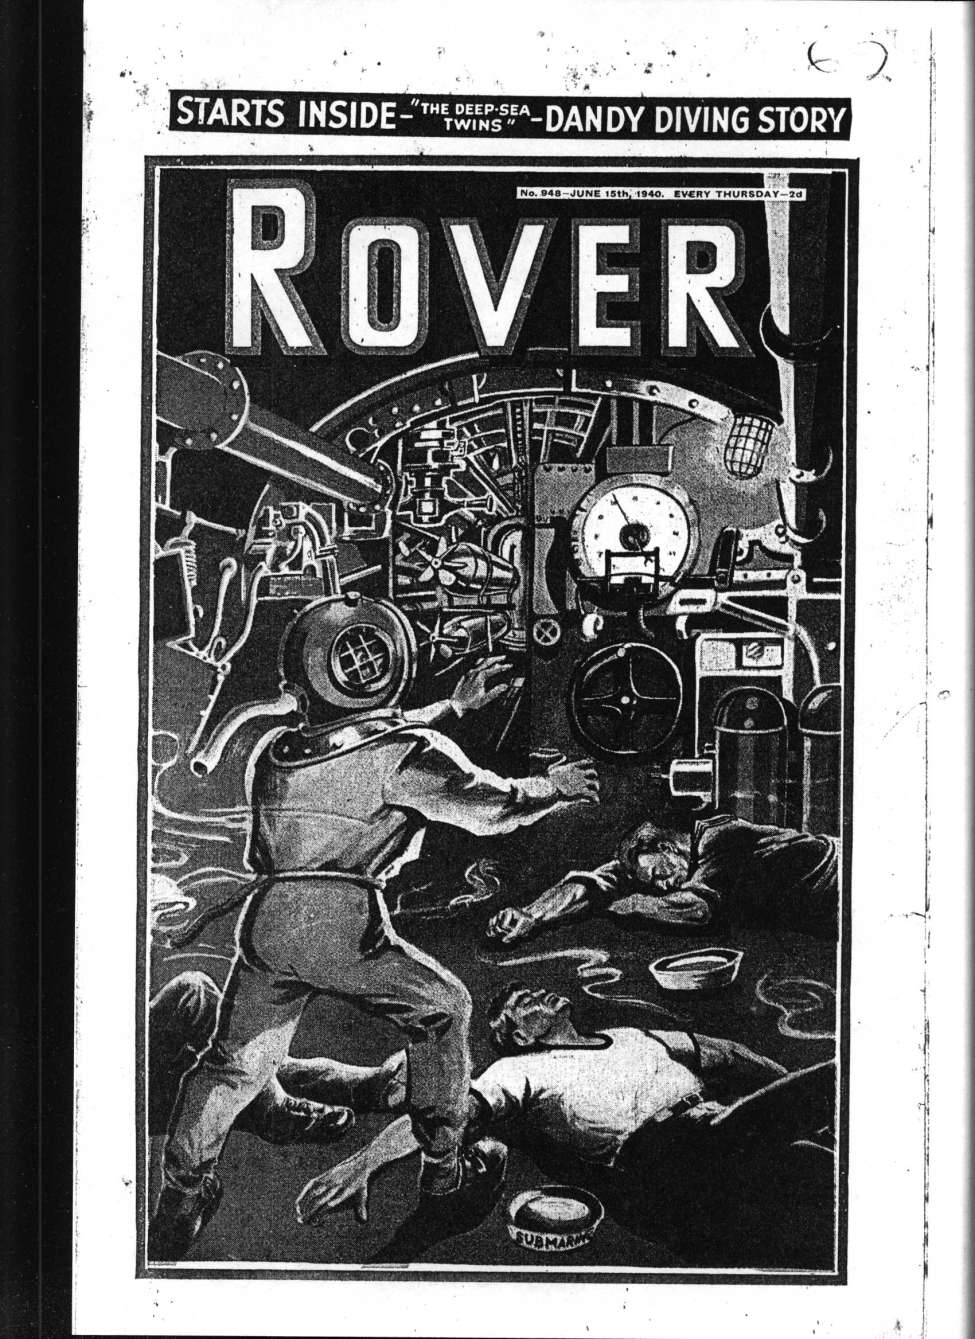 Book Cover For The Rover 948